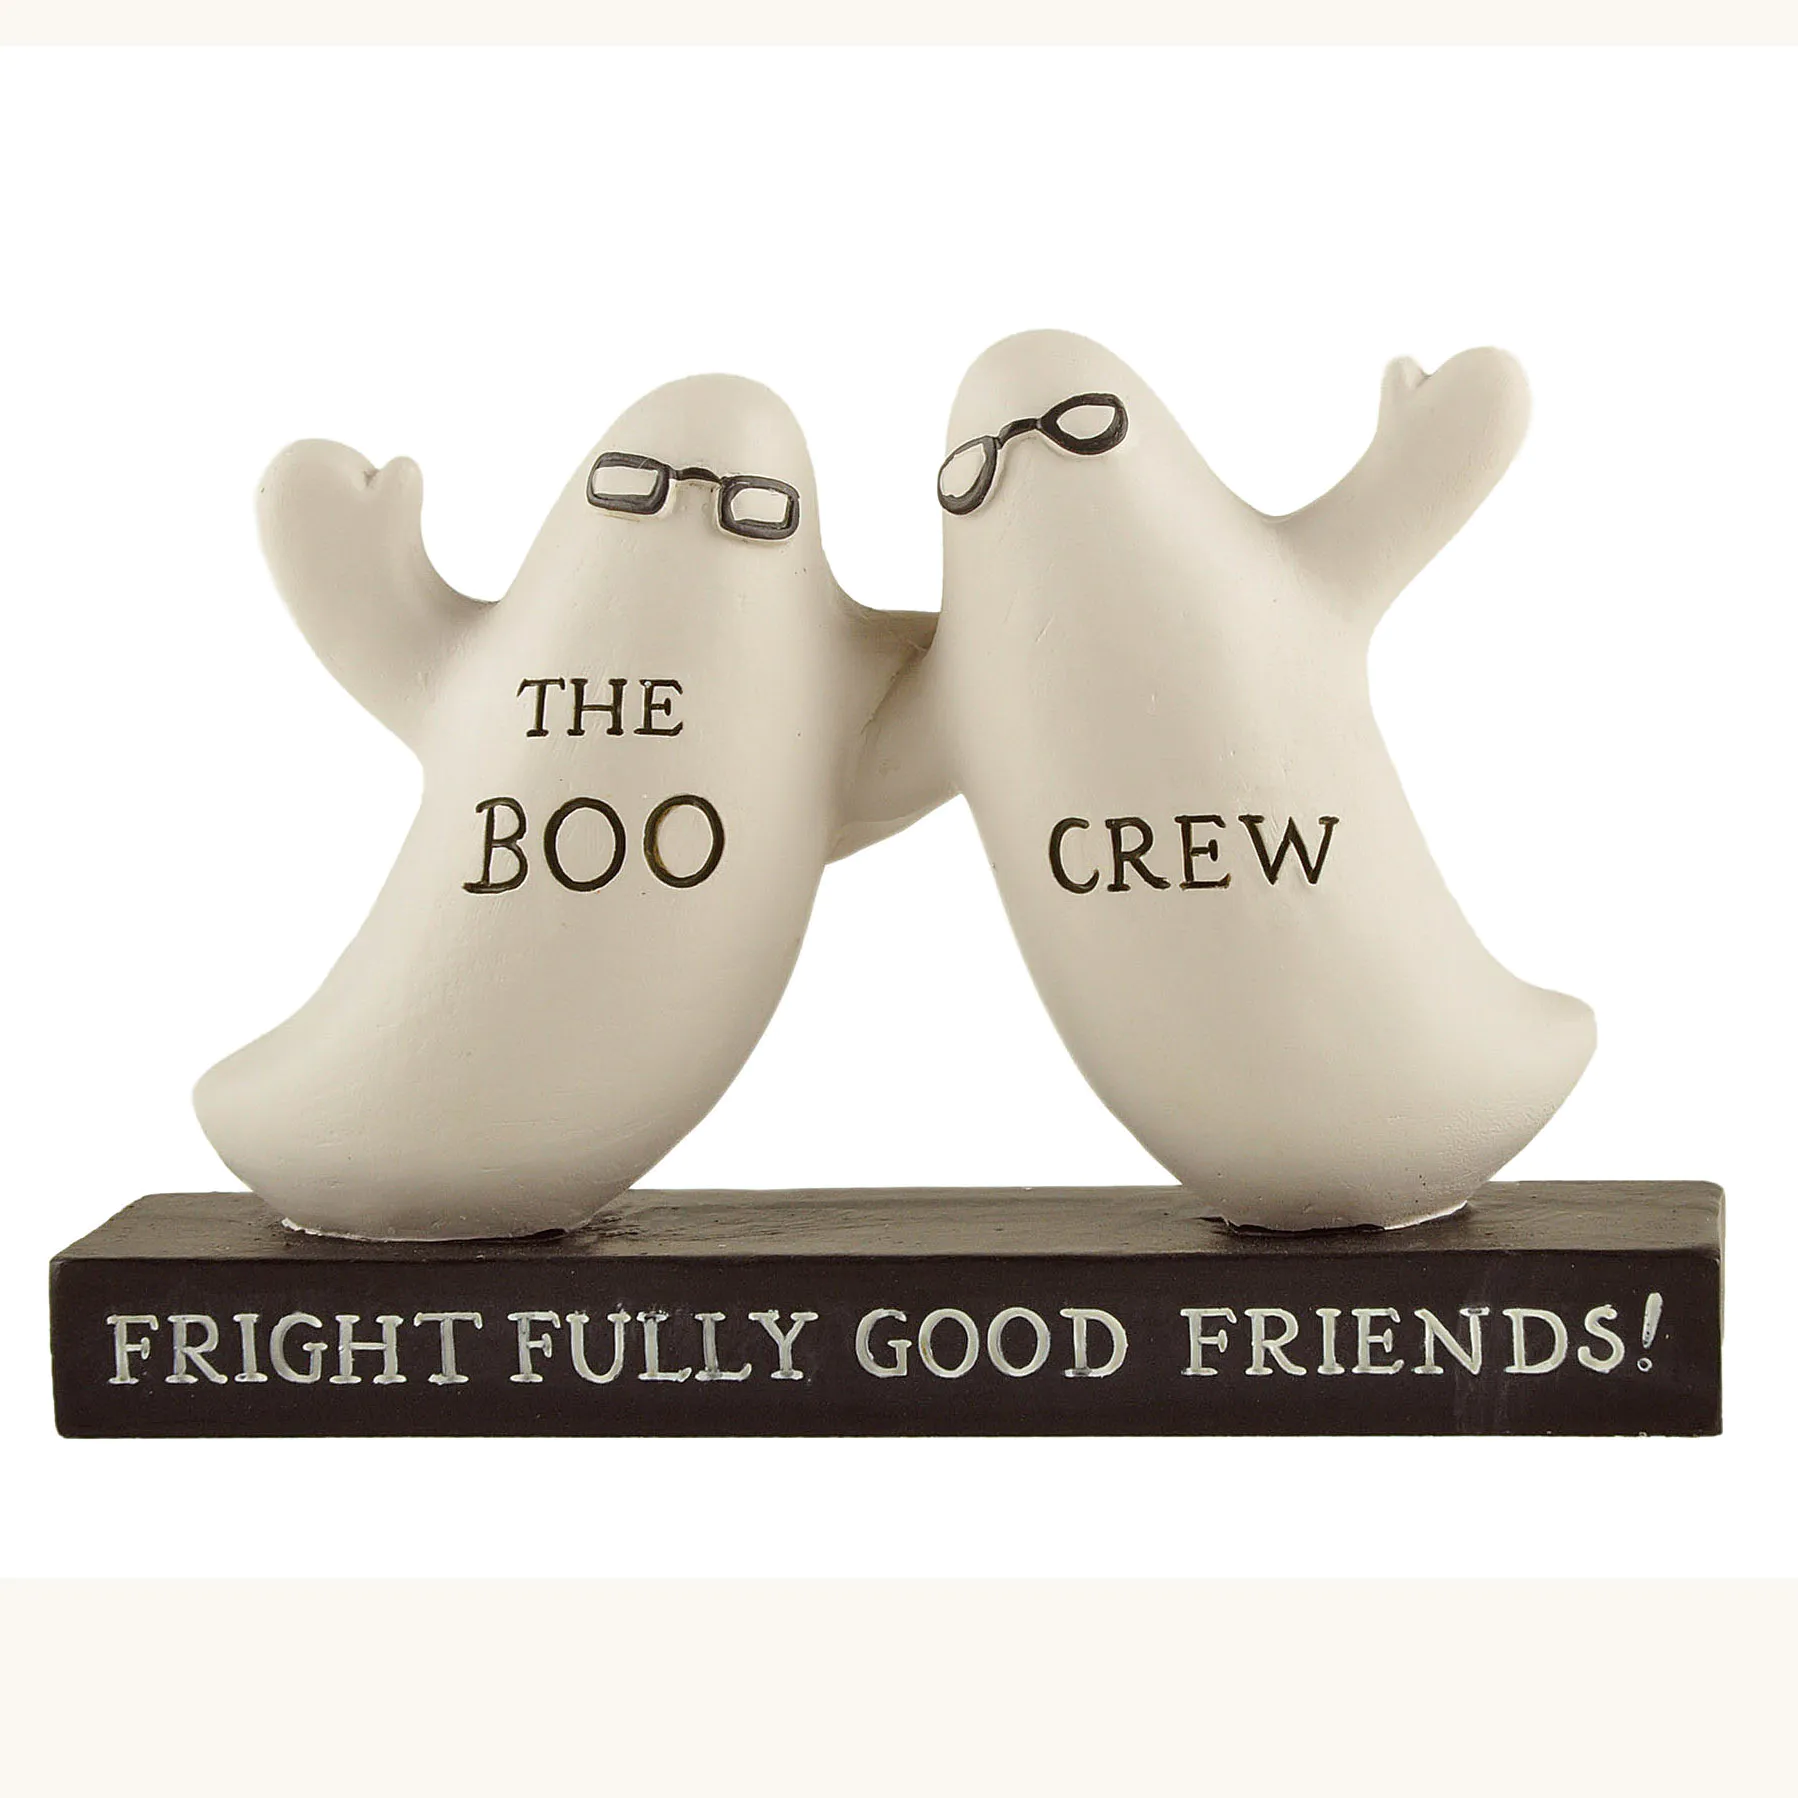 Ghostly Companions: 'The Boo Crew' Resin Craft - 'Frightfully Good Friends!' Limited Edition Collectible236-13858